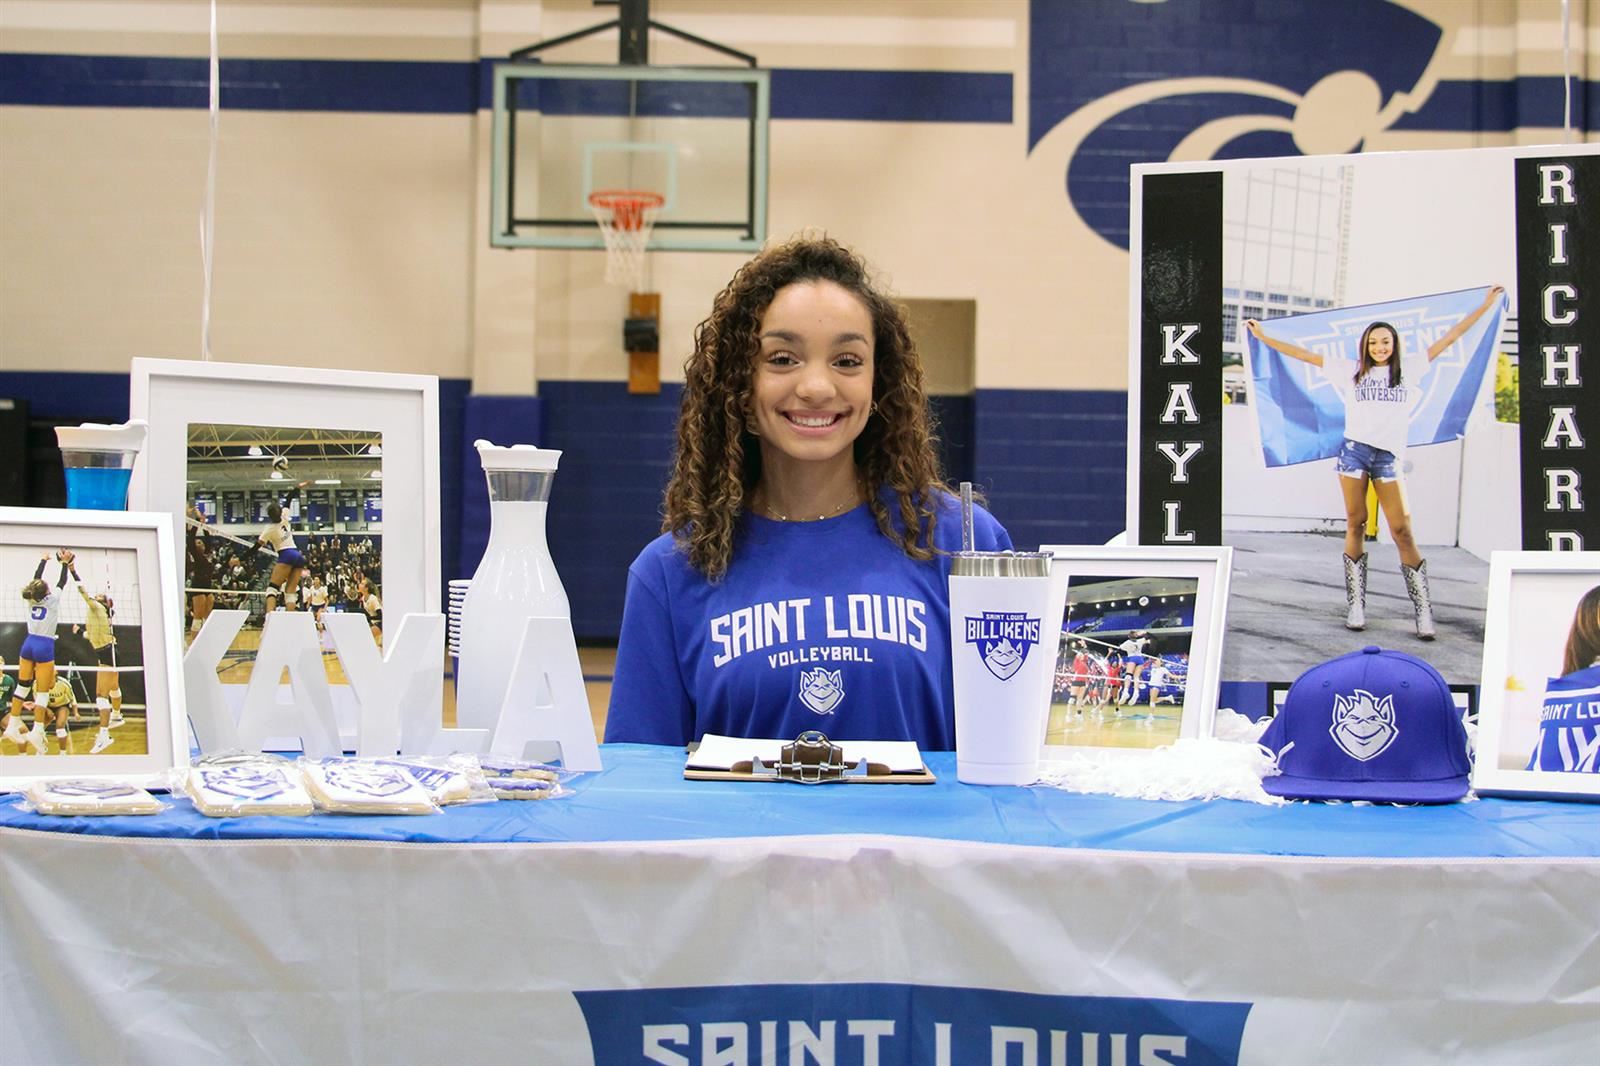 Cypress Creek High School senior Kayla Richardson signed a letter of intent to play volleyball at St. Louis University.